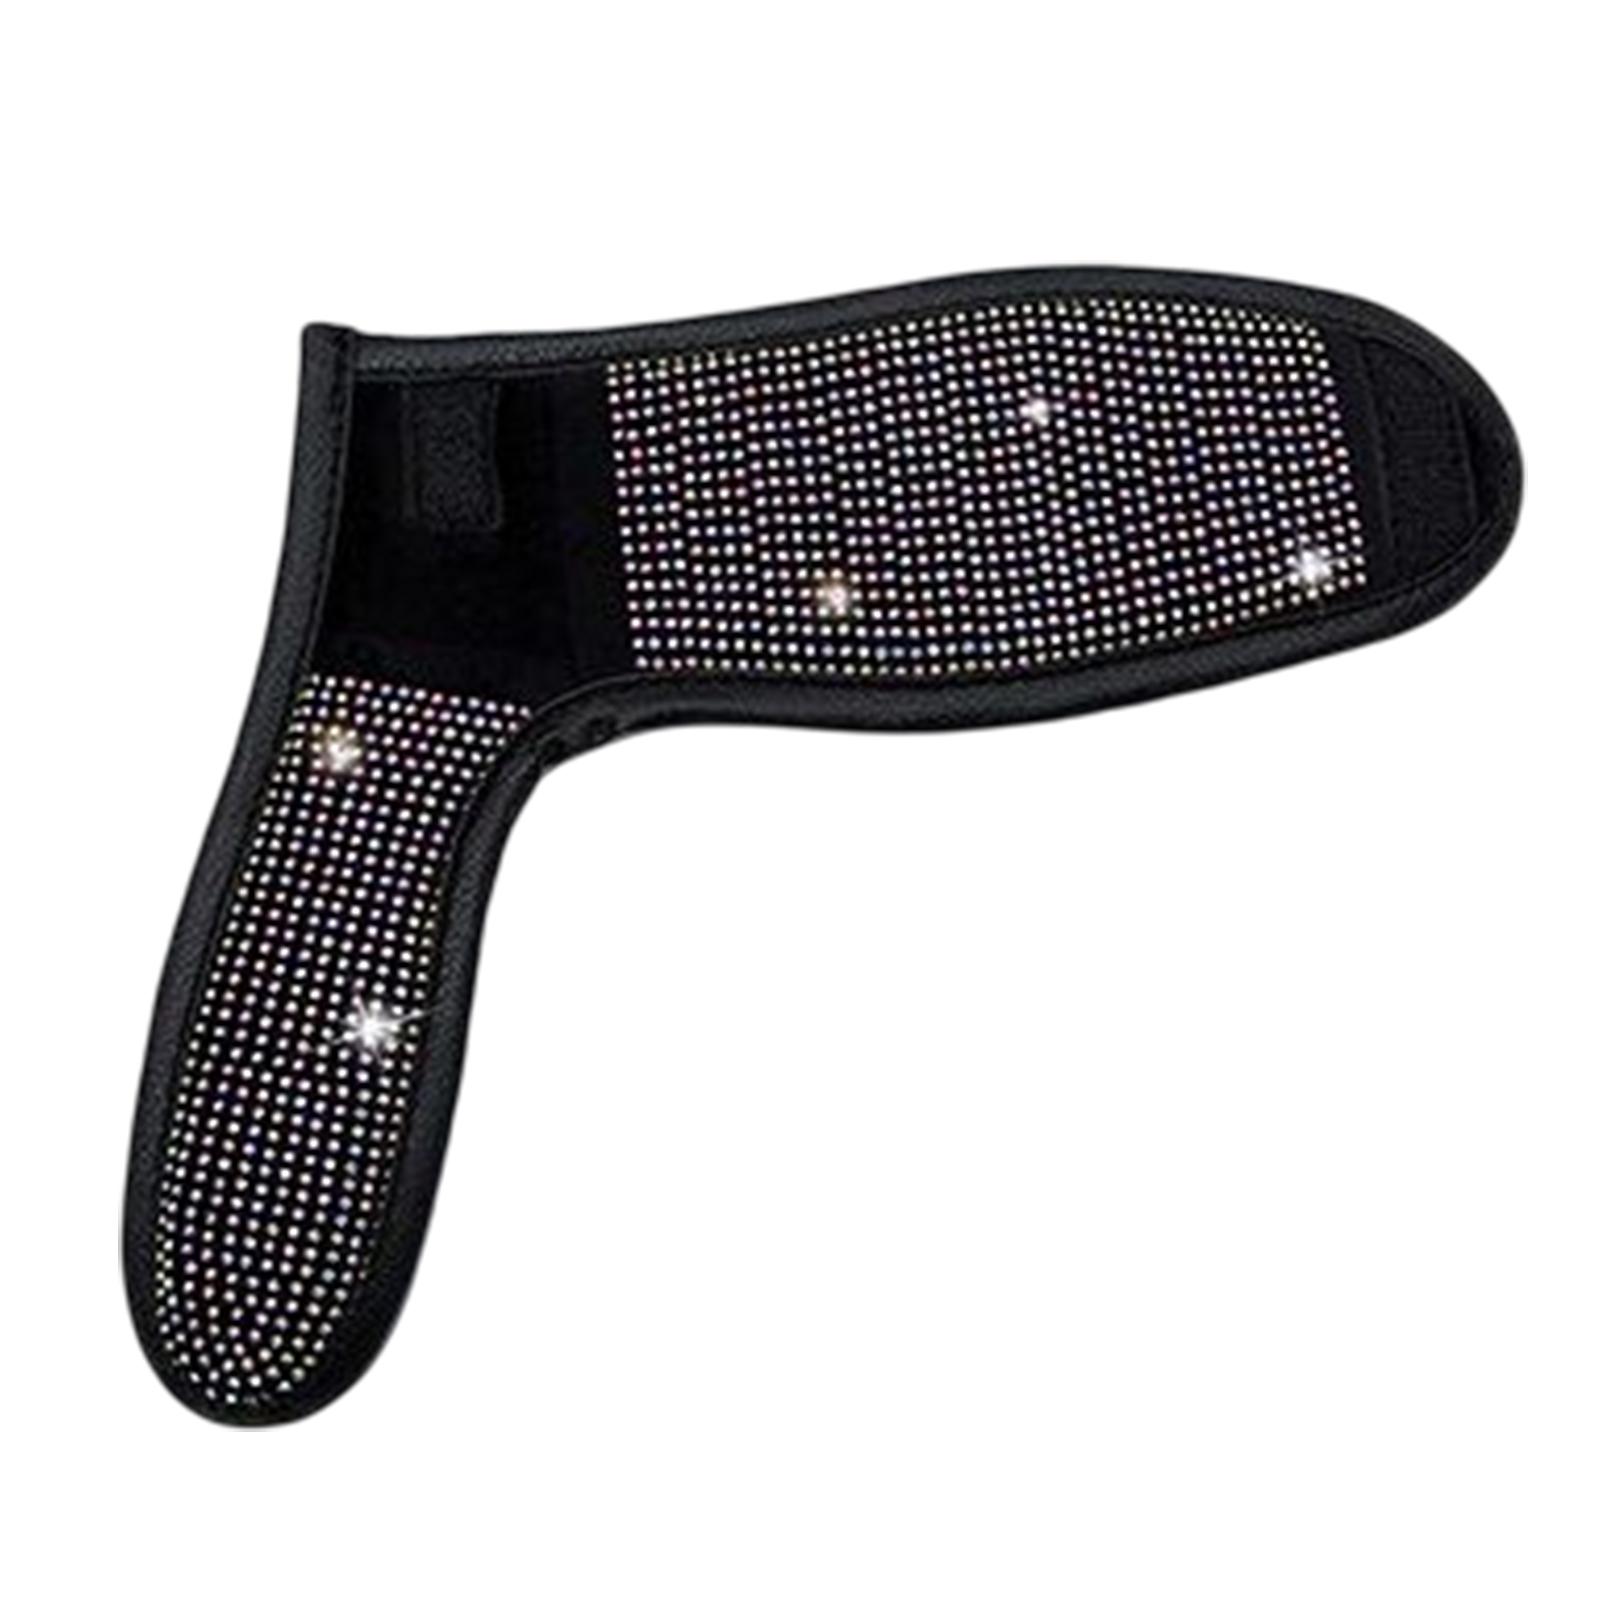 Car Accessories Cover pad Interior Accessories with bling Rhinestone Gear Shift Cover Pad